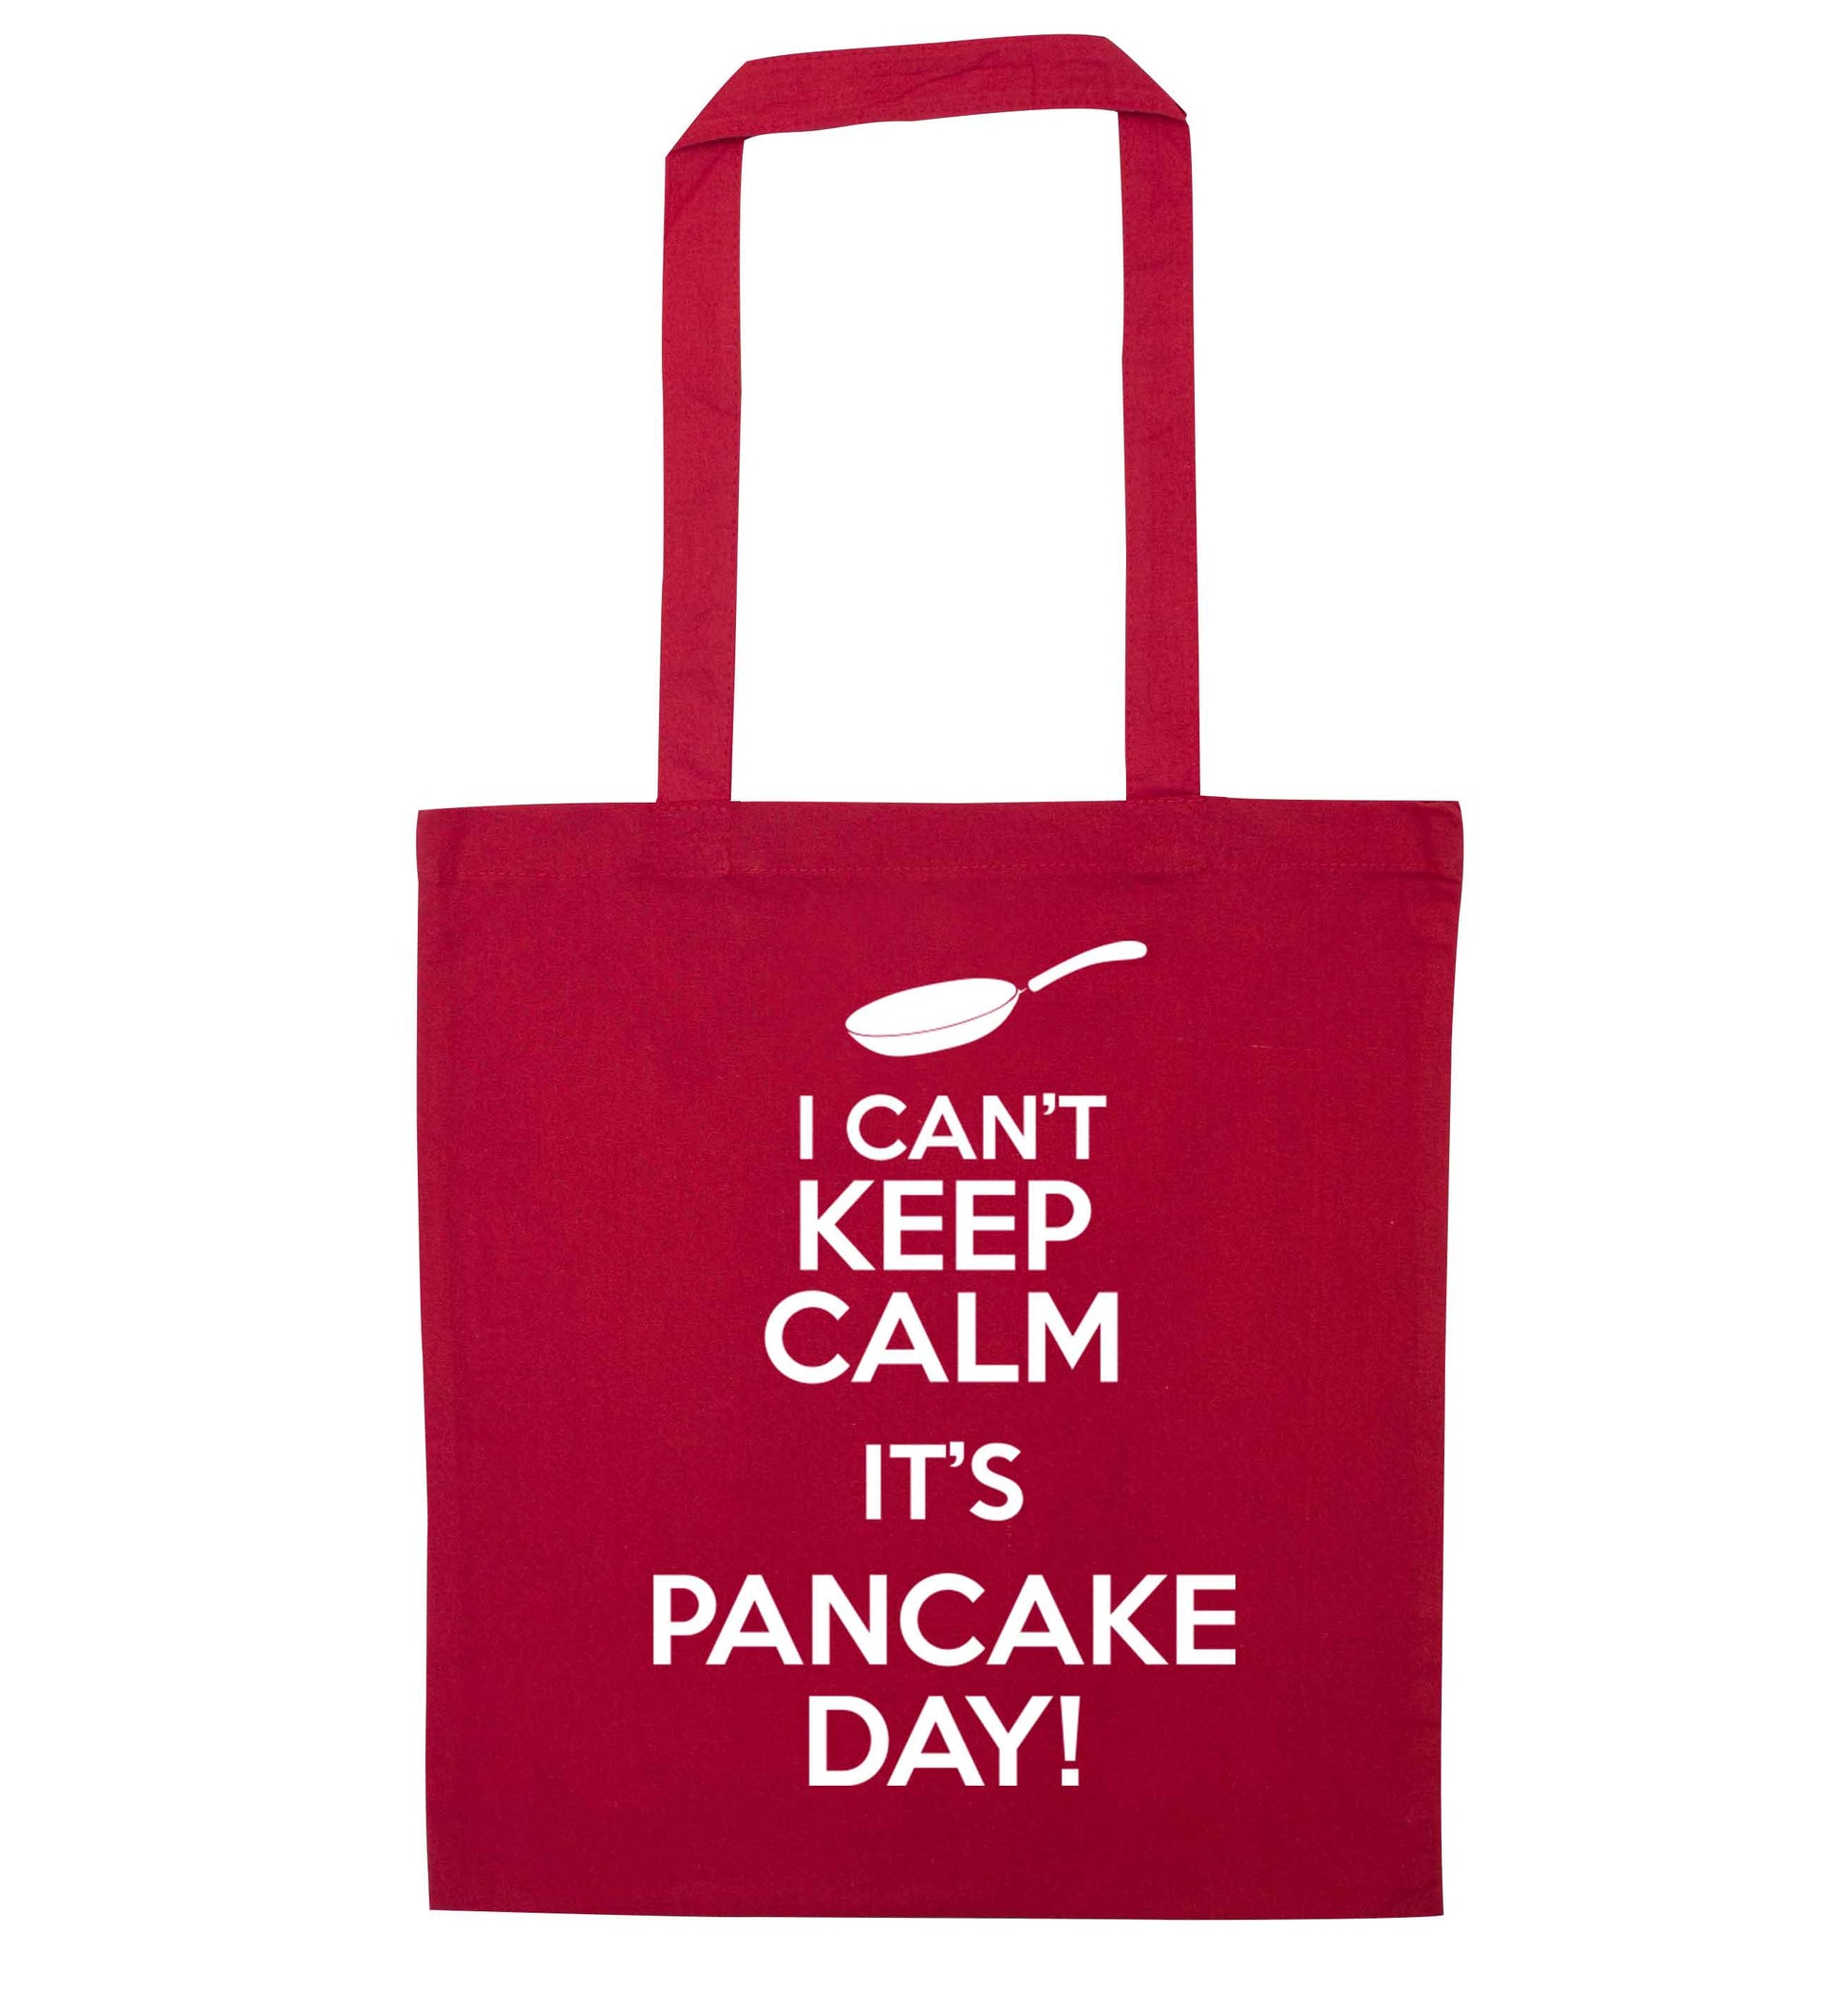 I can't keep calm it's pancake day! red tote bag